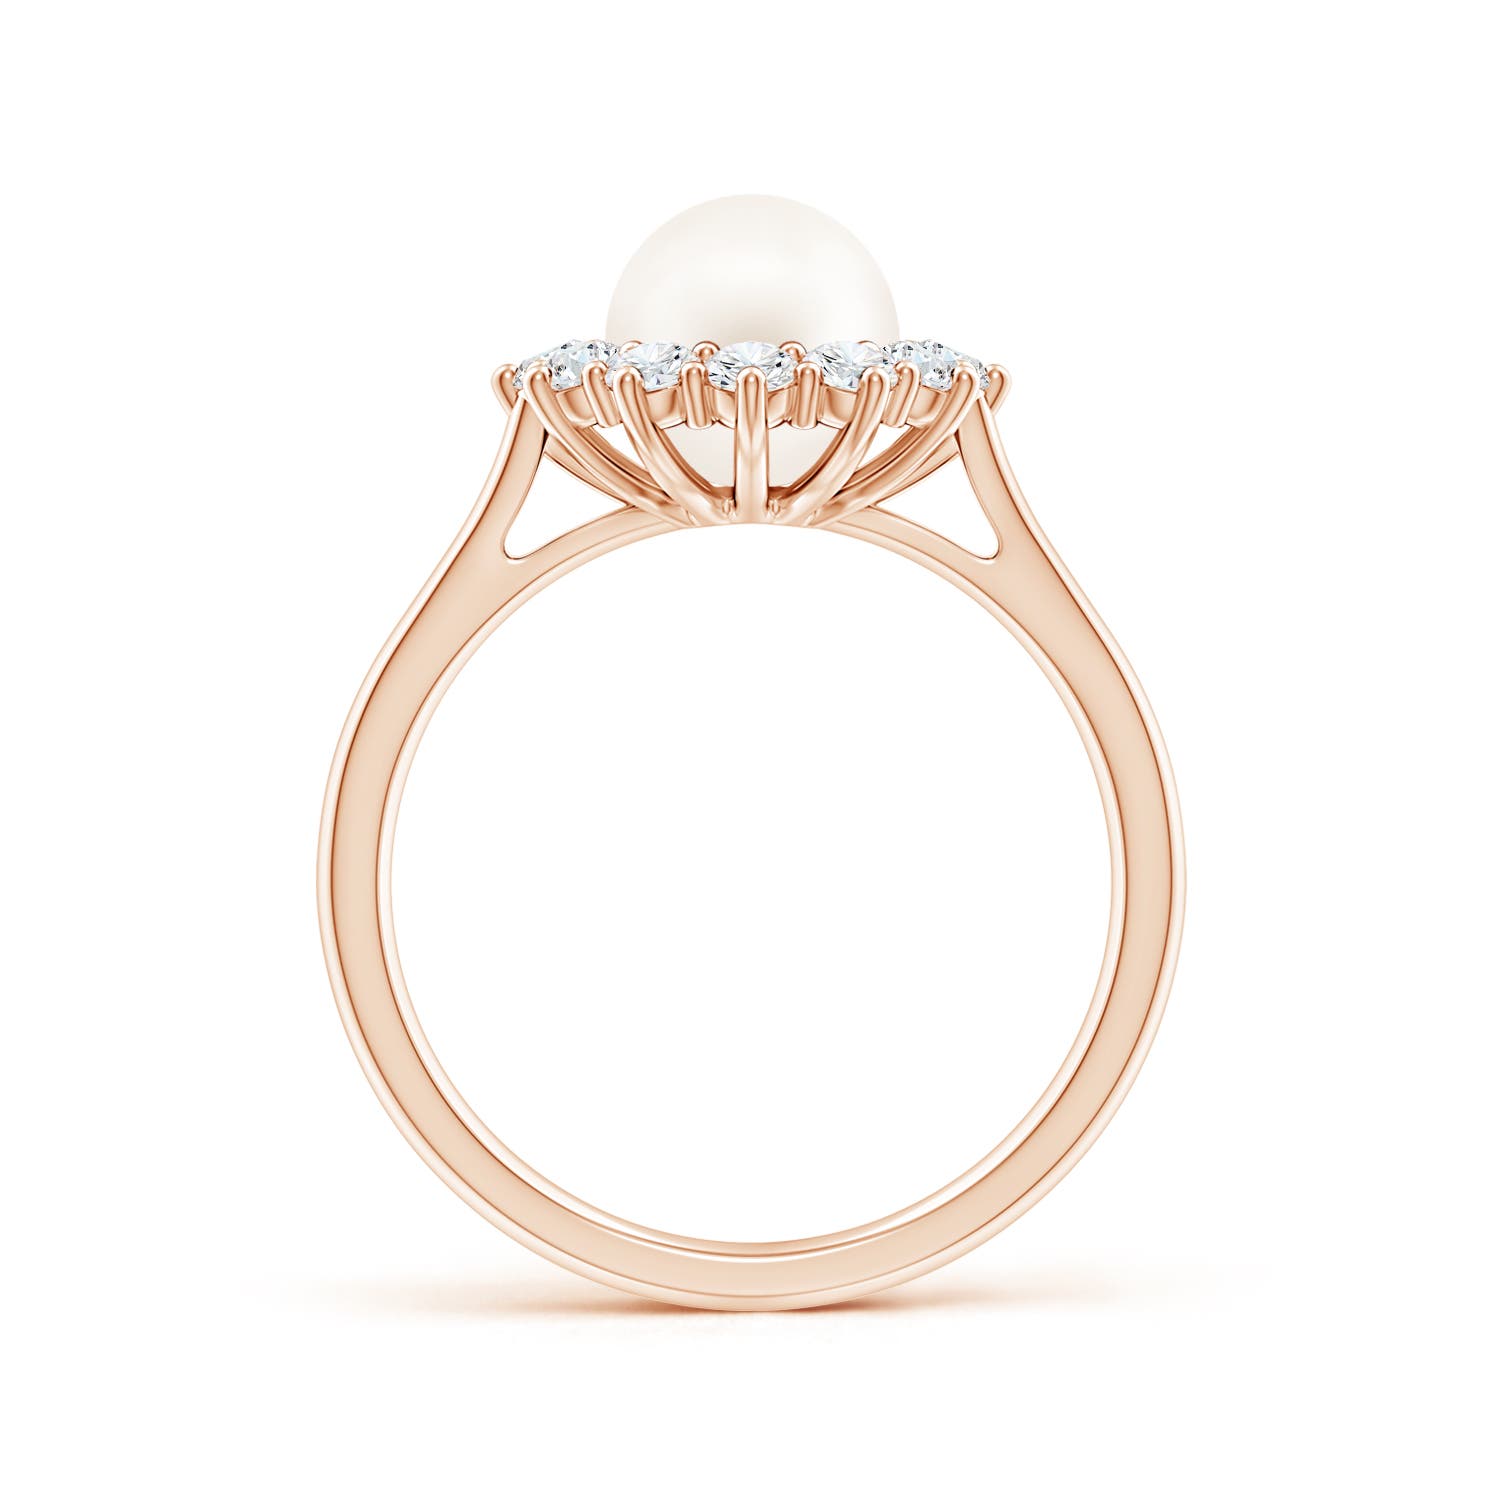 AA / 3 CT / 14 KT Rose Gold